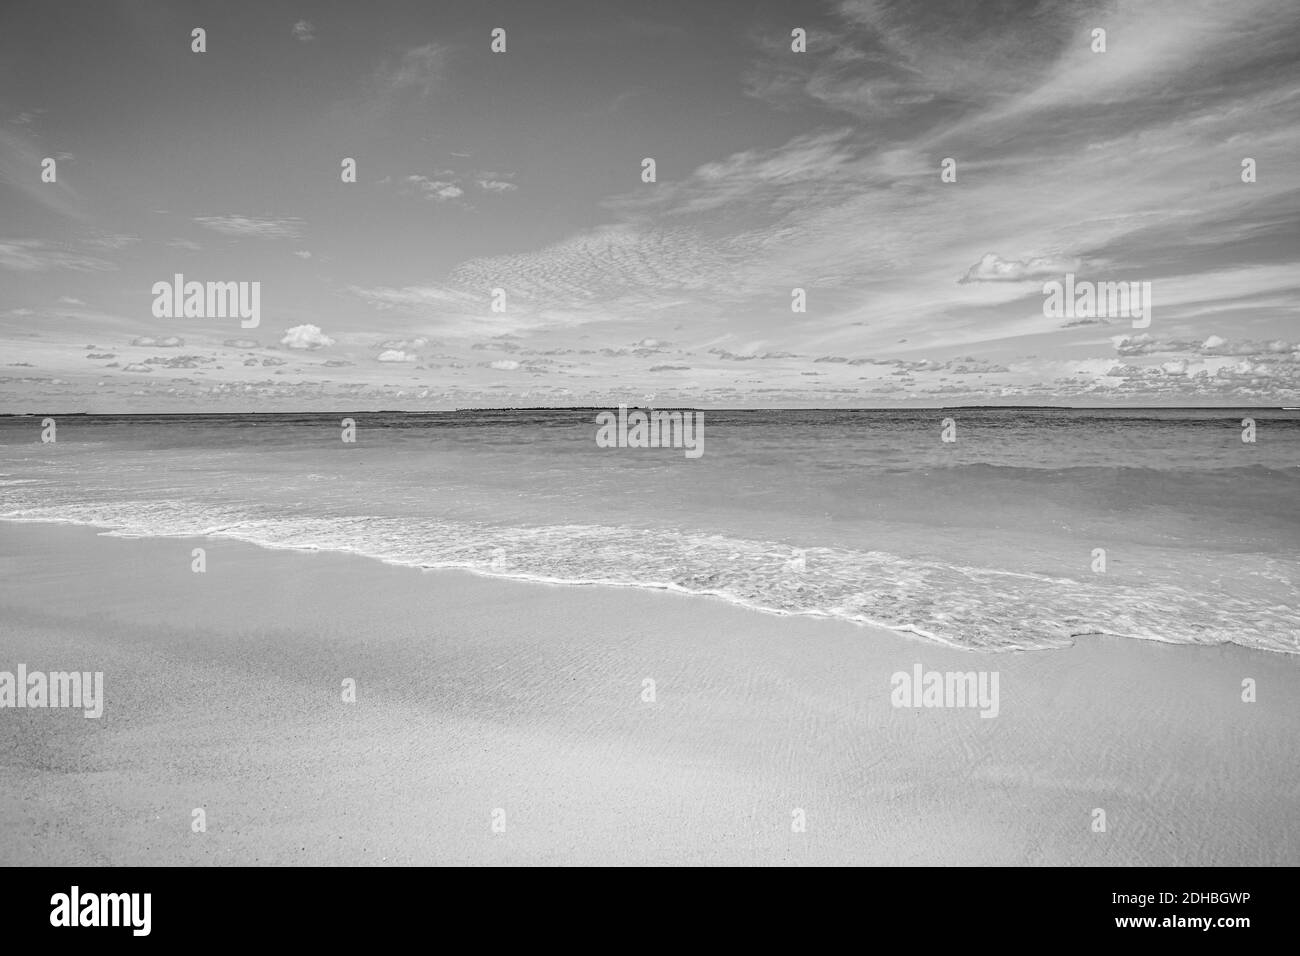 Wave and sandy beach in black and white. Calm view during sunset at seaside. Calm waves splashing sea horizon and dramatic mood Stock Photo